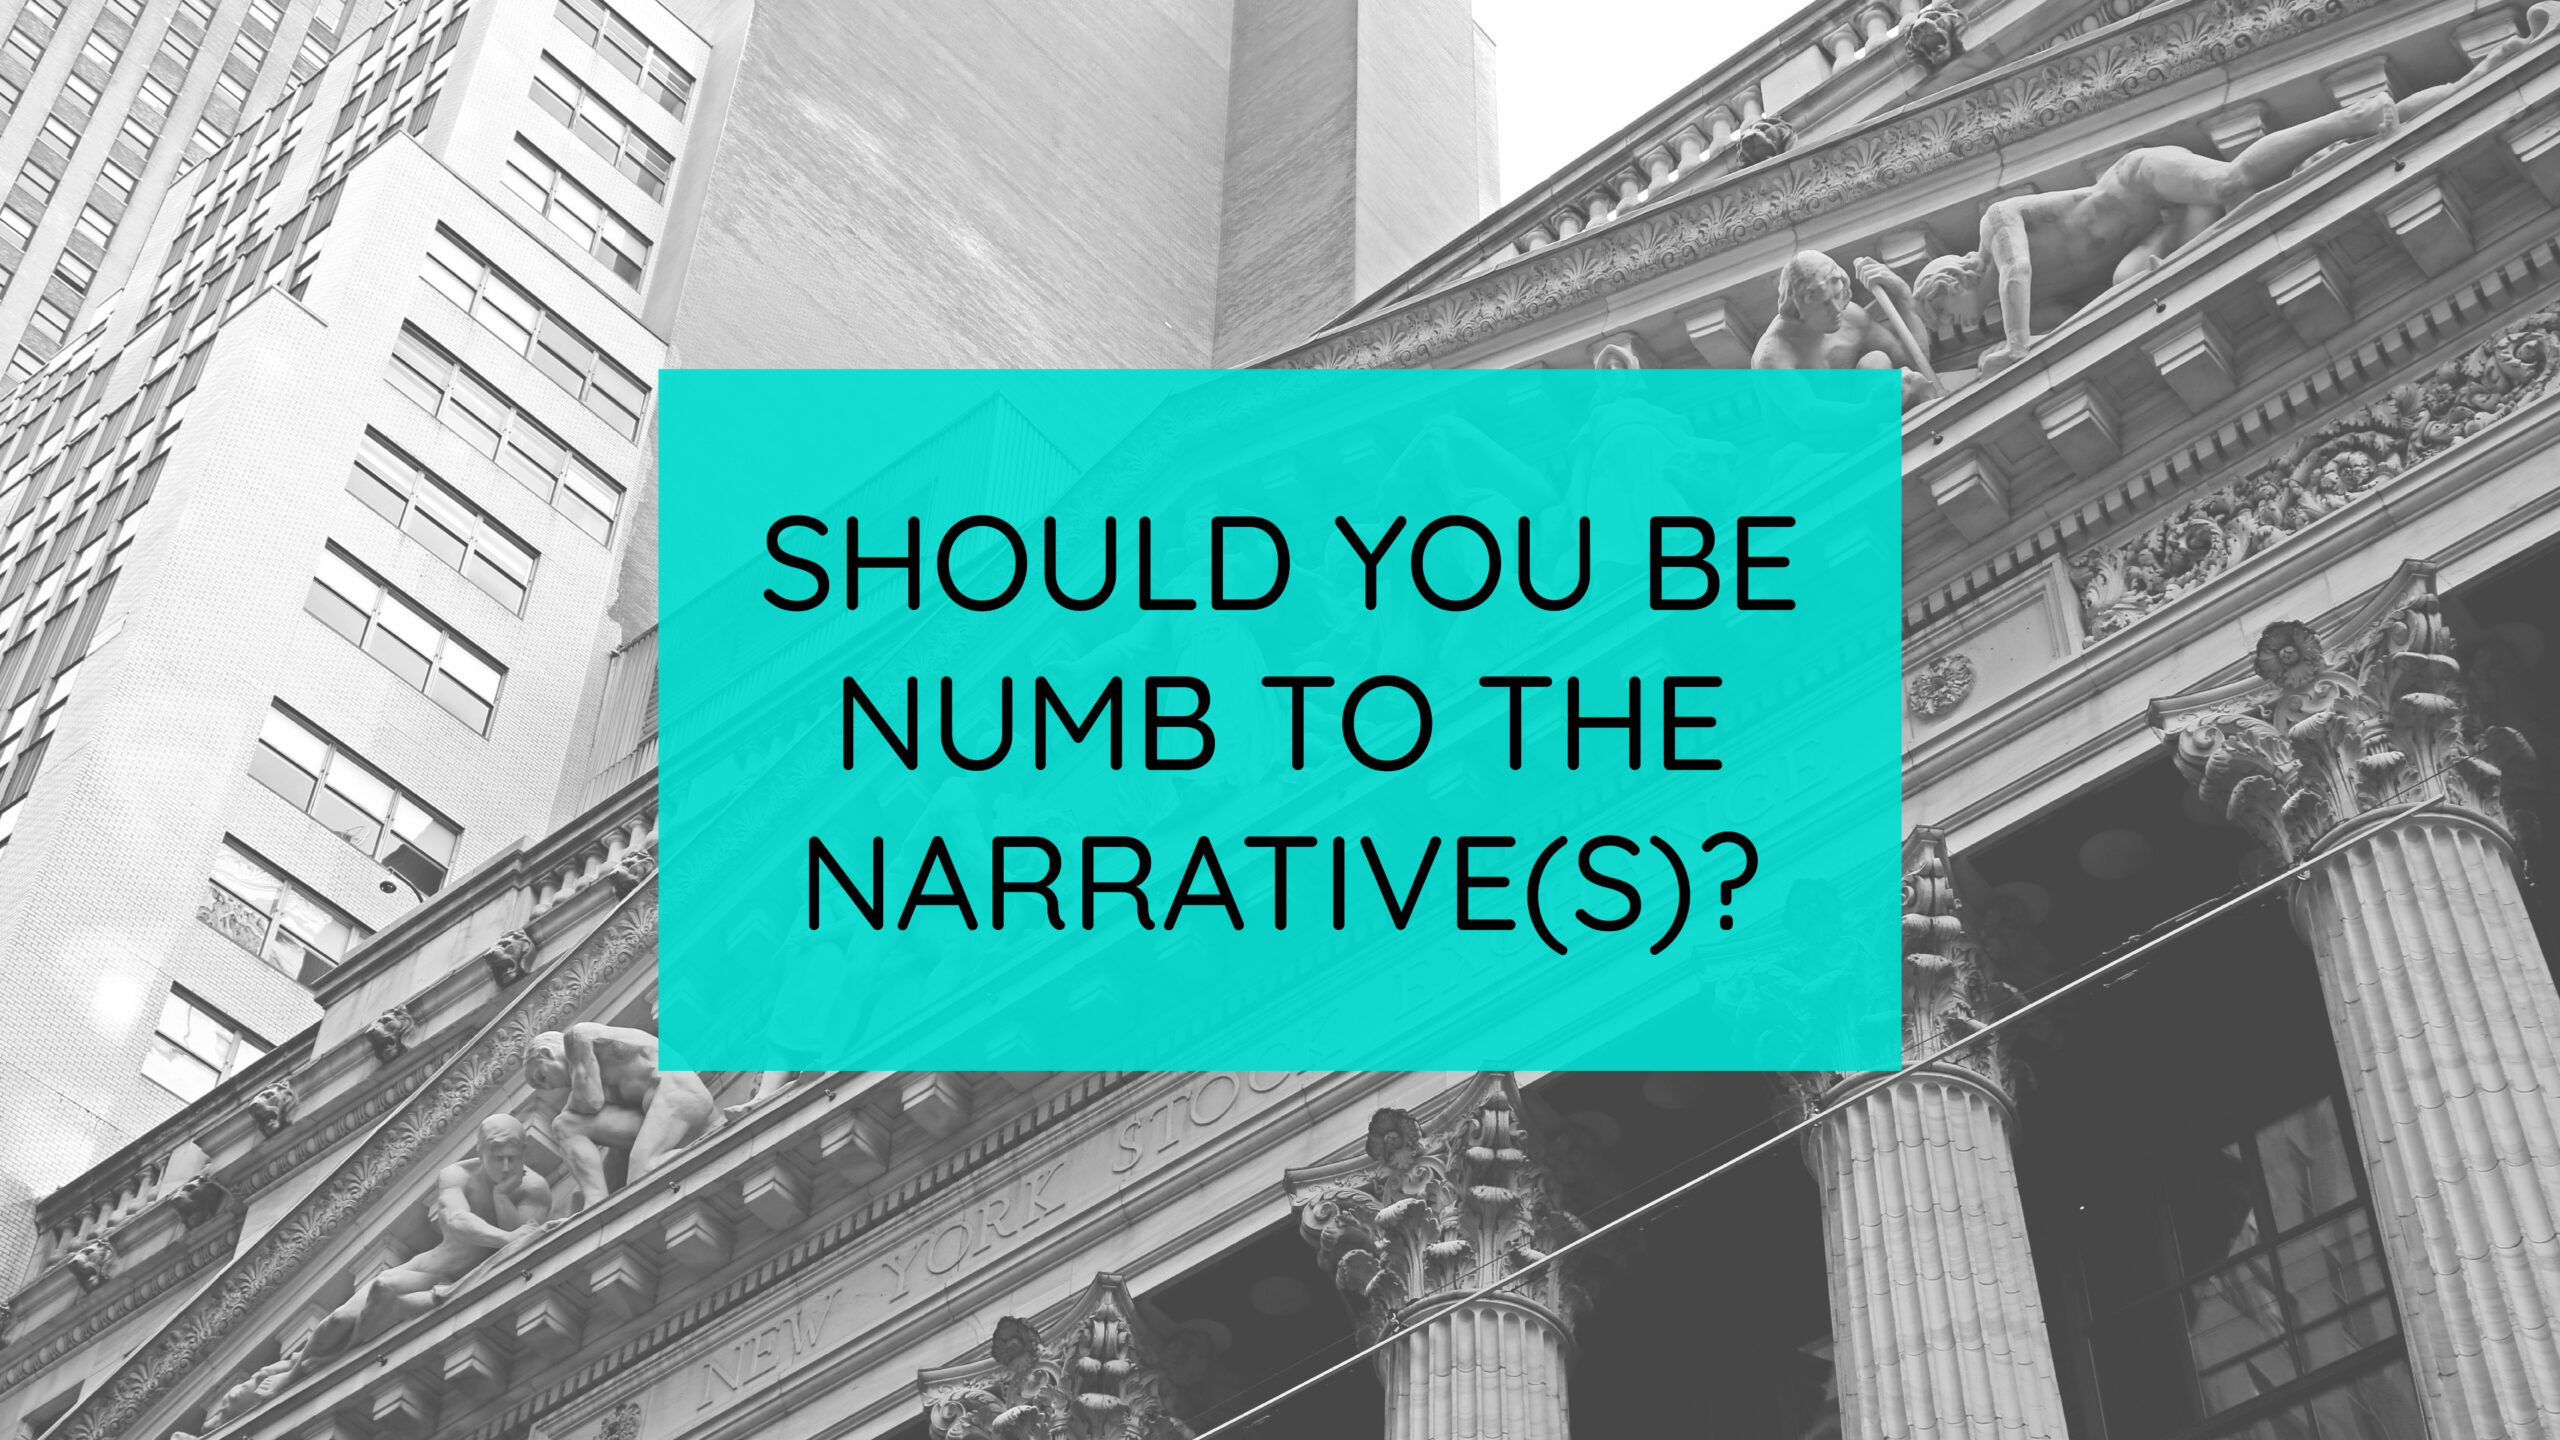 Should You Be Numb To the Narrative(s)?